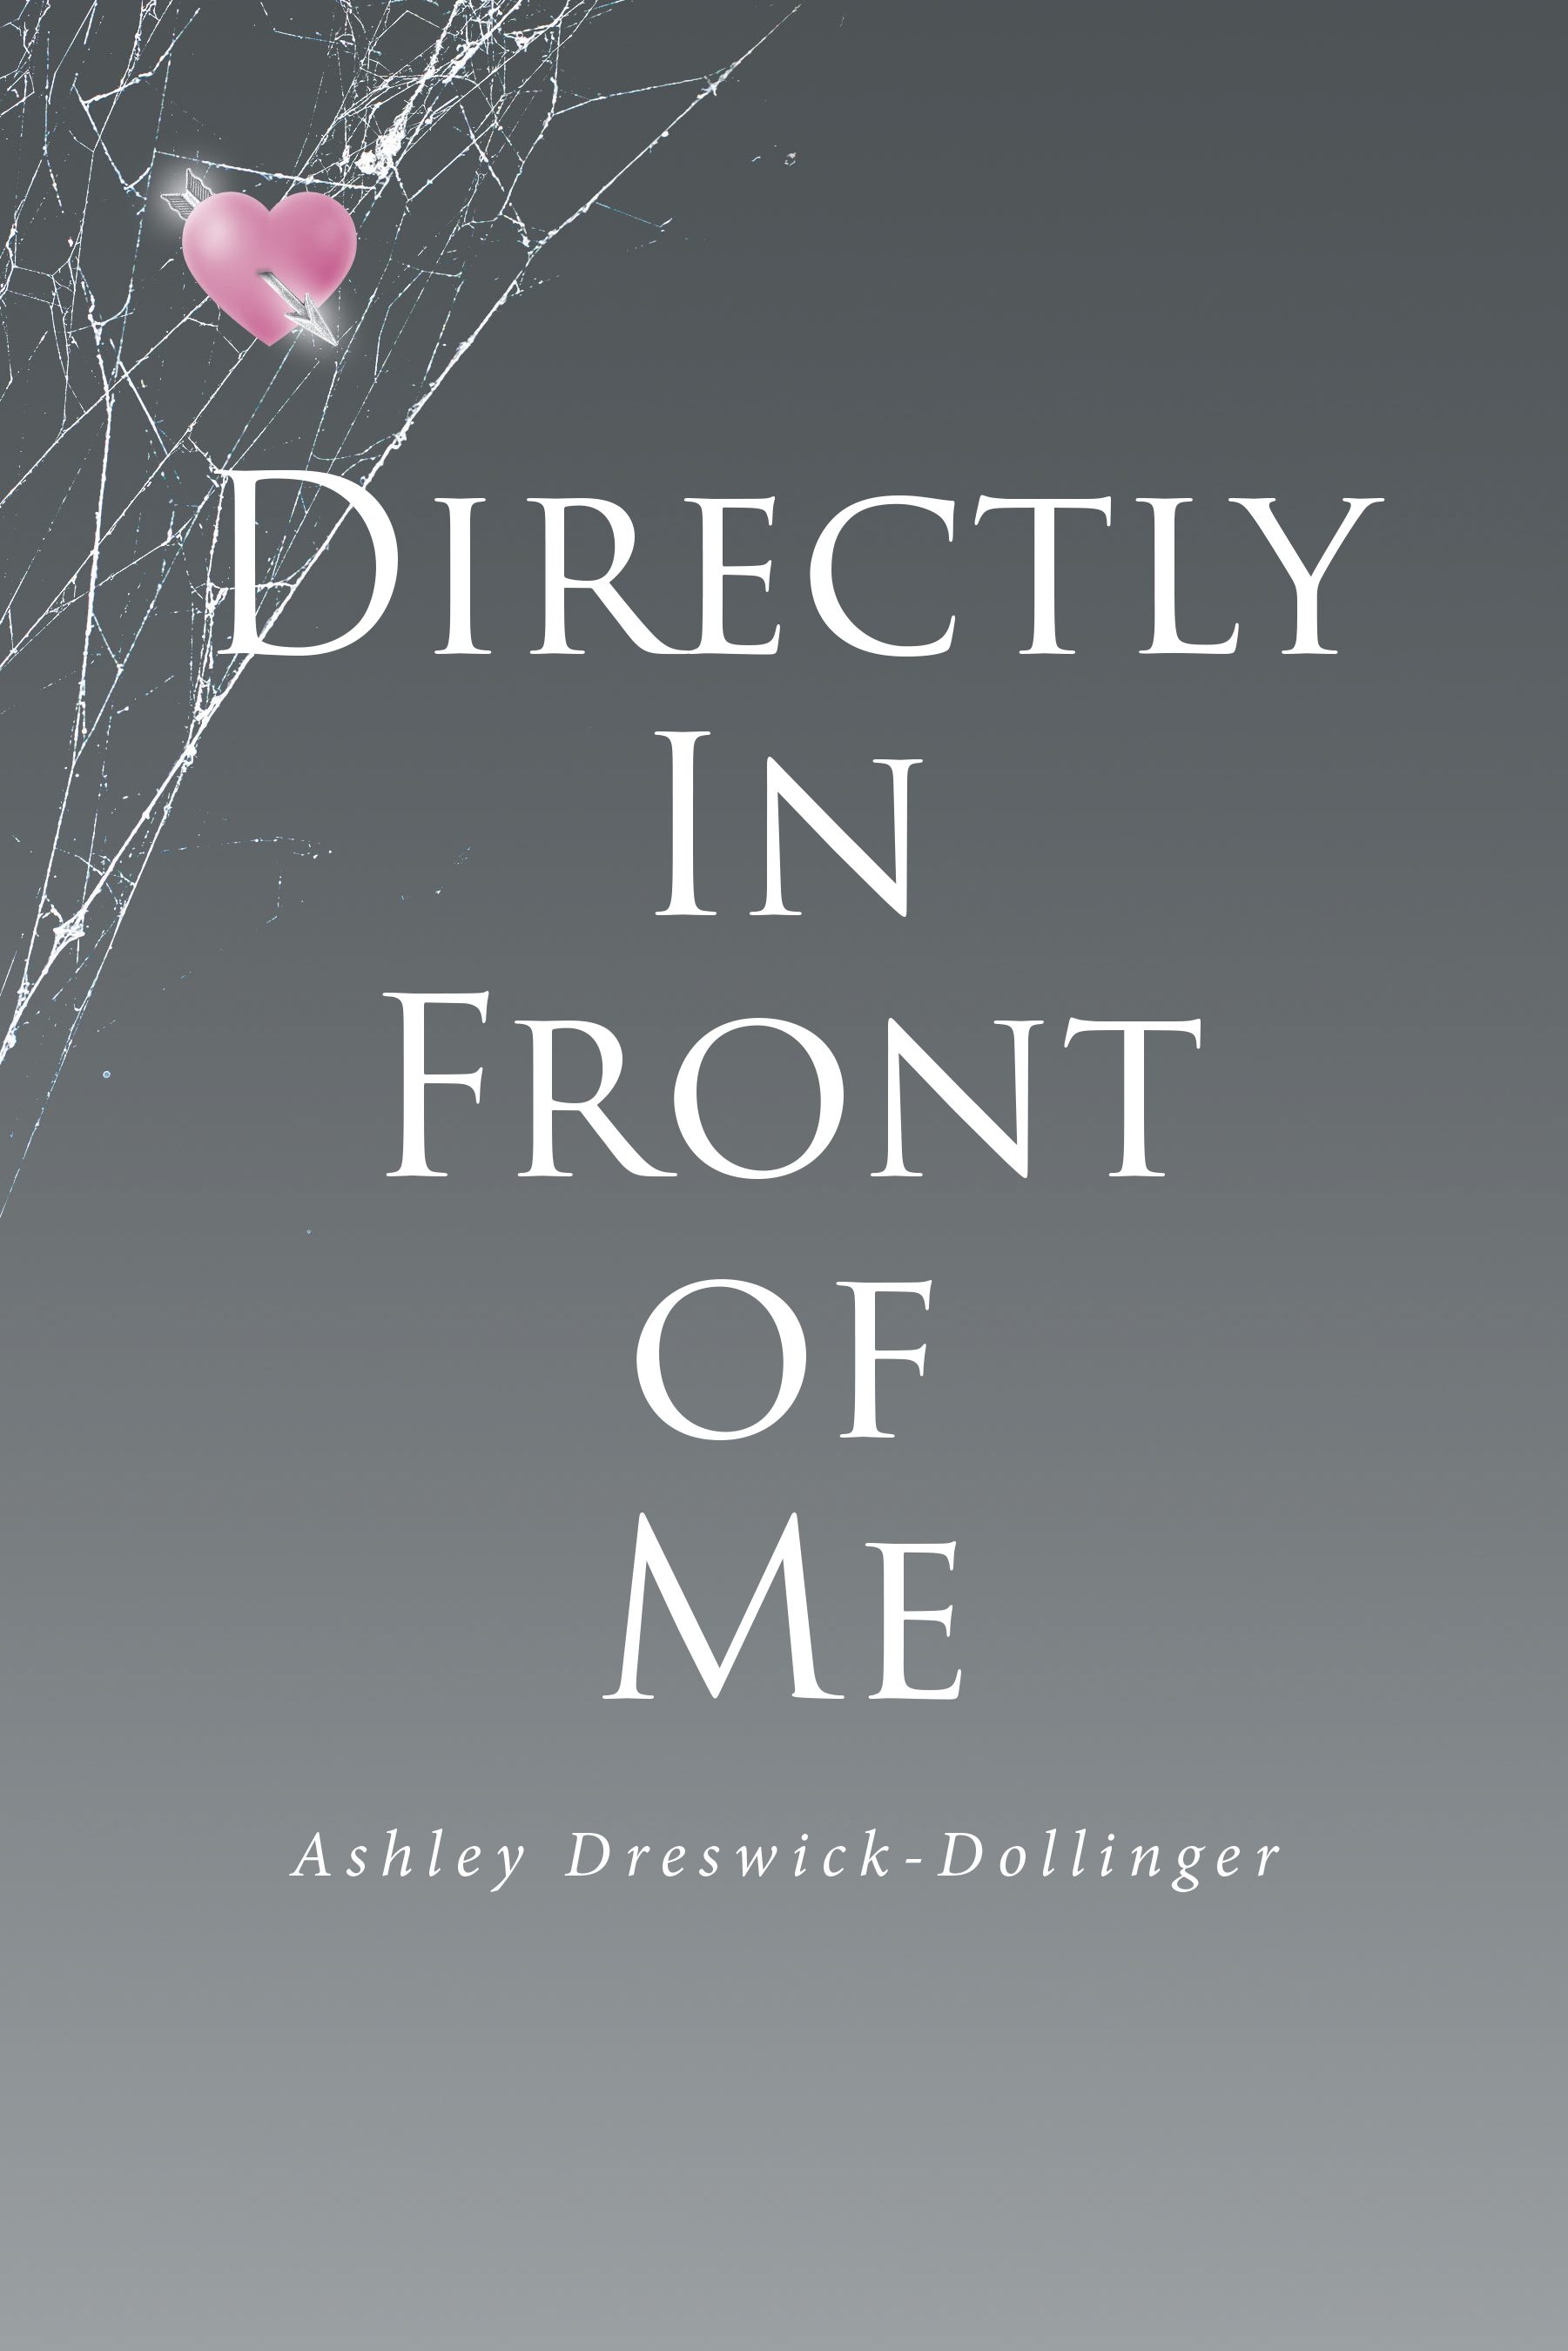 Ashley Dreswick-Dollinger’s New Book, "Directly in Front of Me," Follows a High Schooler’s Attempts to Navigate Her Past Traumas & Relationships in Order to Move Forward